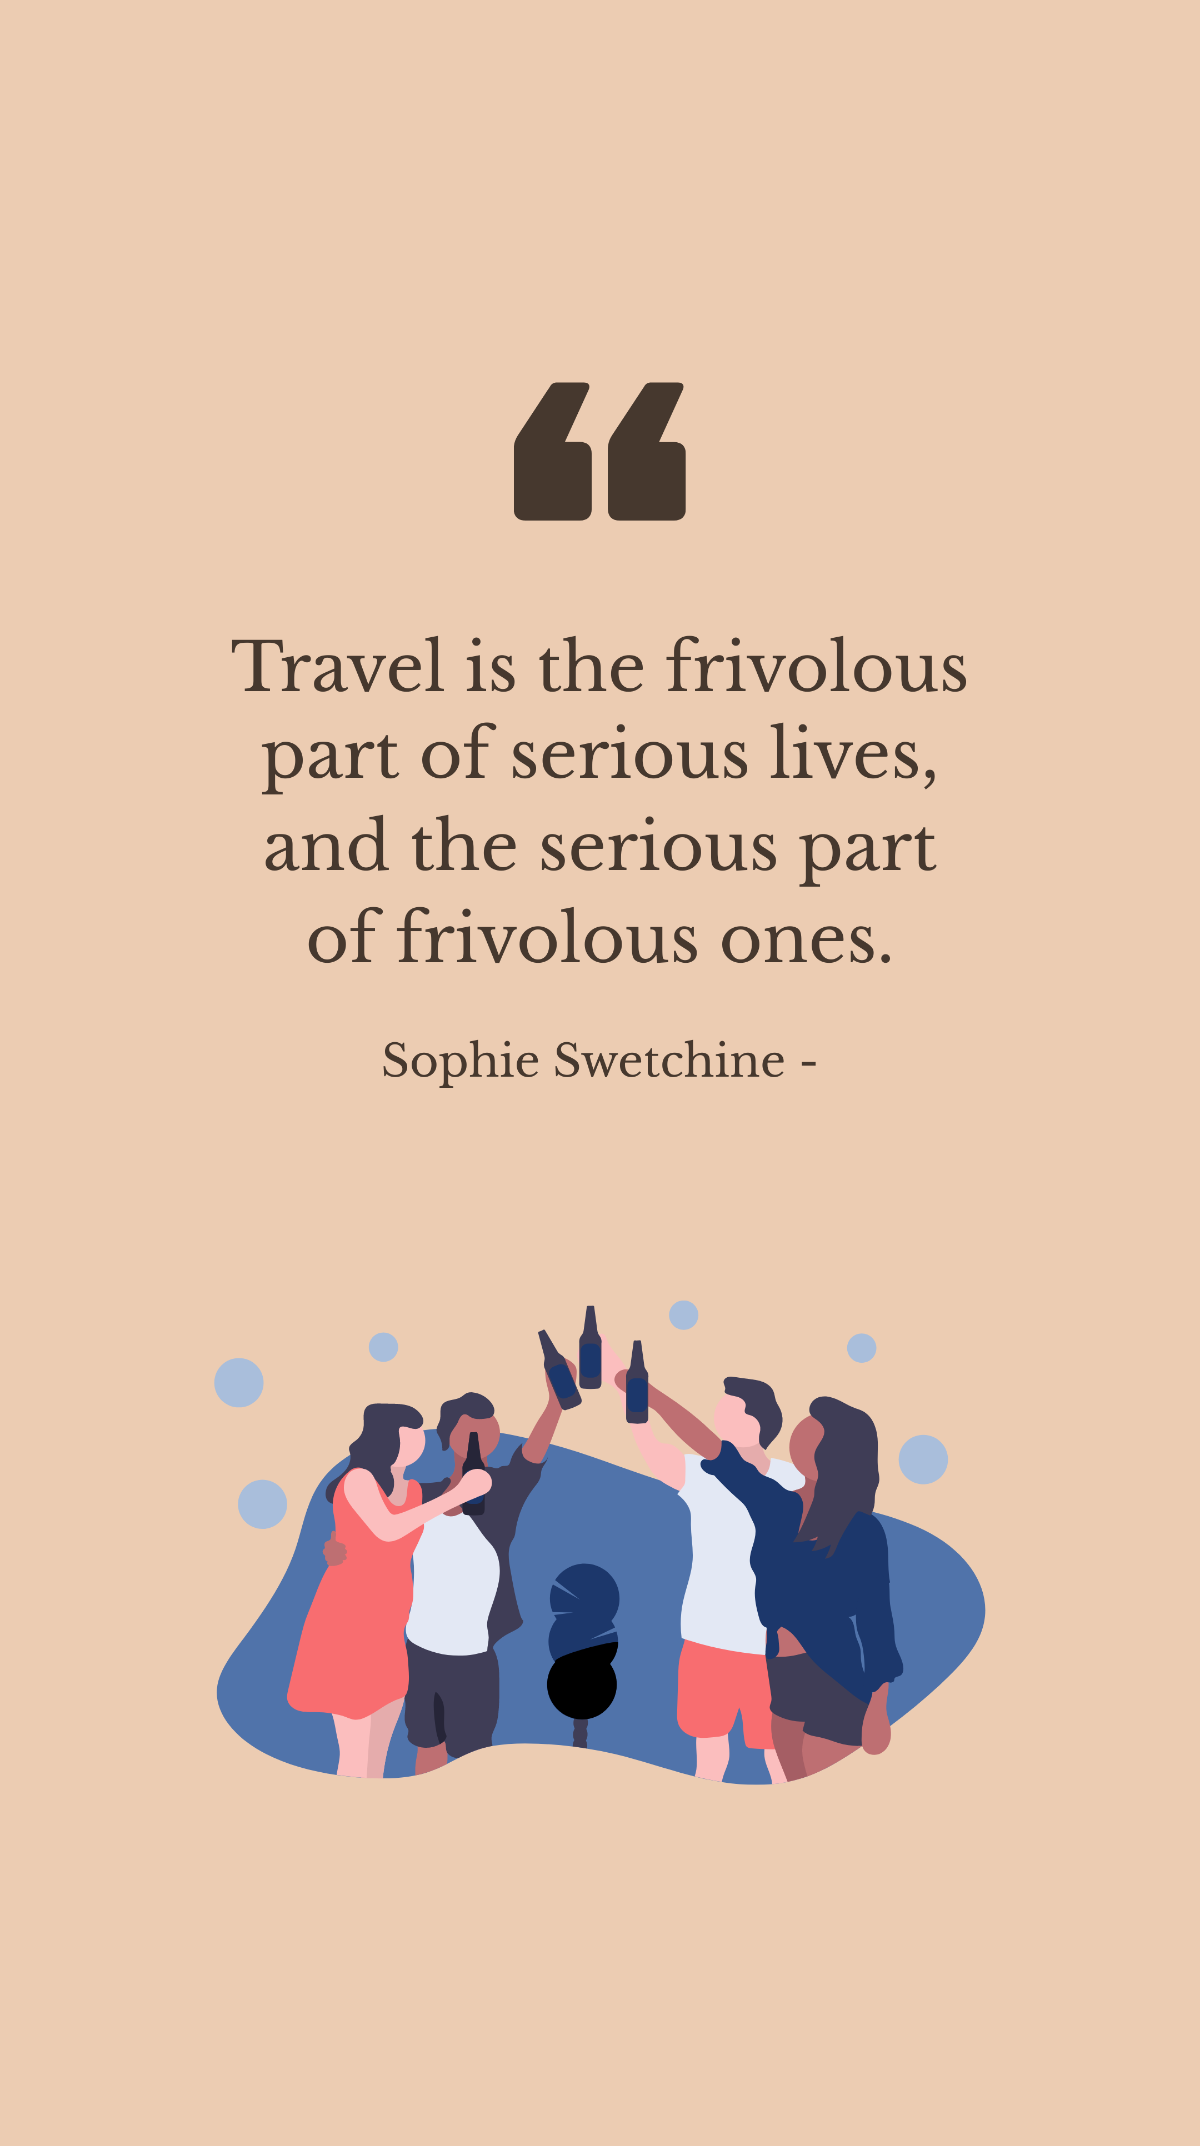 Free Sophie Swetchine - Travel is the frivolous part of serious lives, and the serious part of frivolous ones. Template